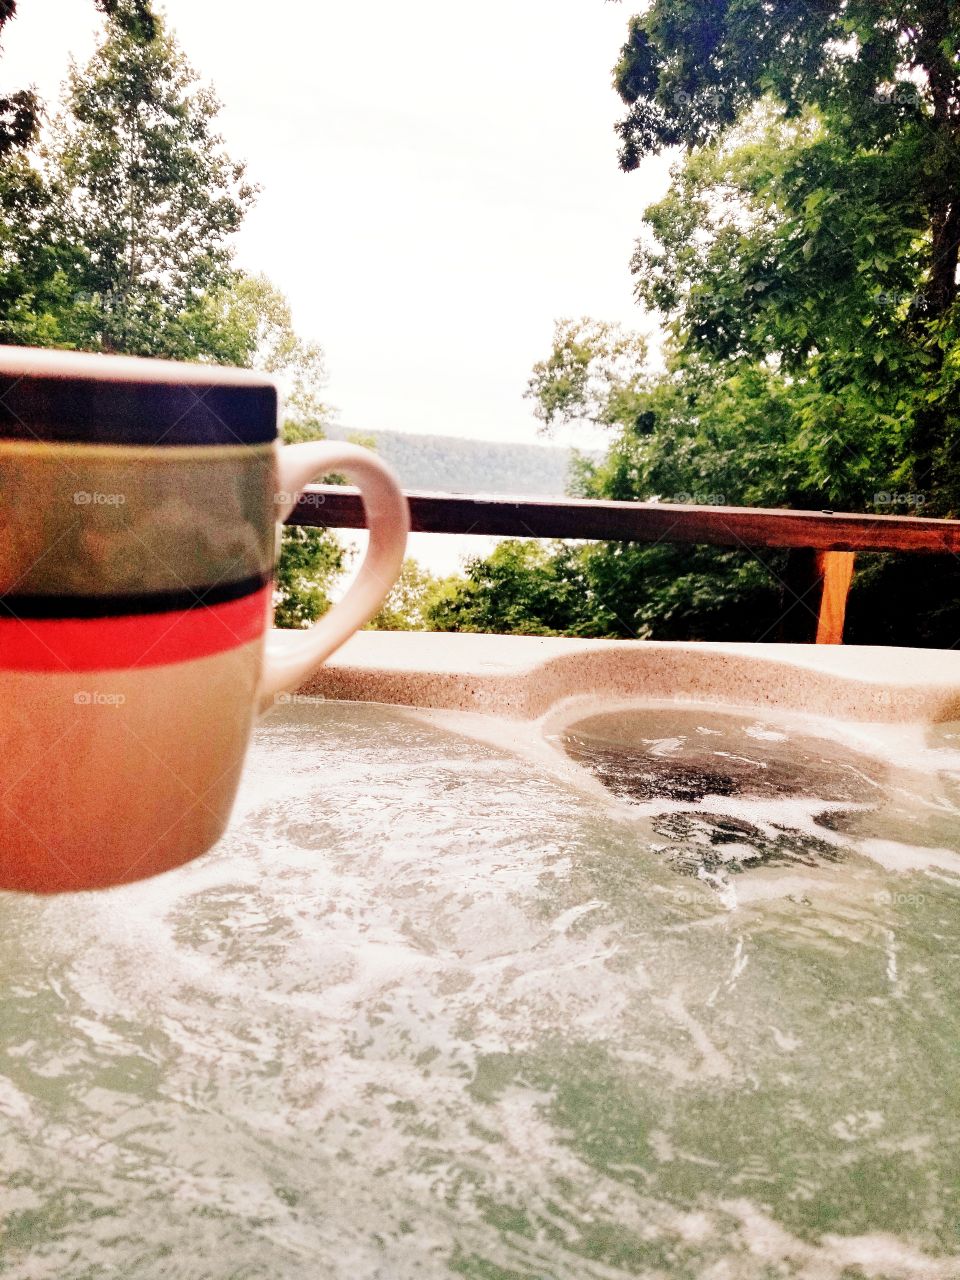 Colorful cup of joe to start the perfect morning morning with the peacefulness of the tranquil lake and bubbles of relaxation in the hot tub surrounded by lush greenery of nature.